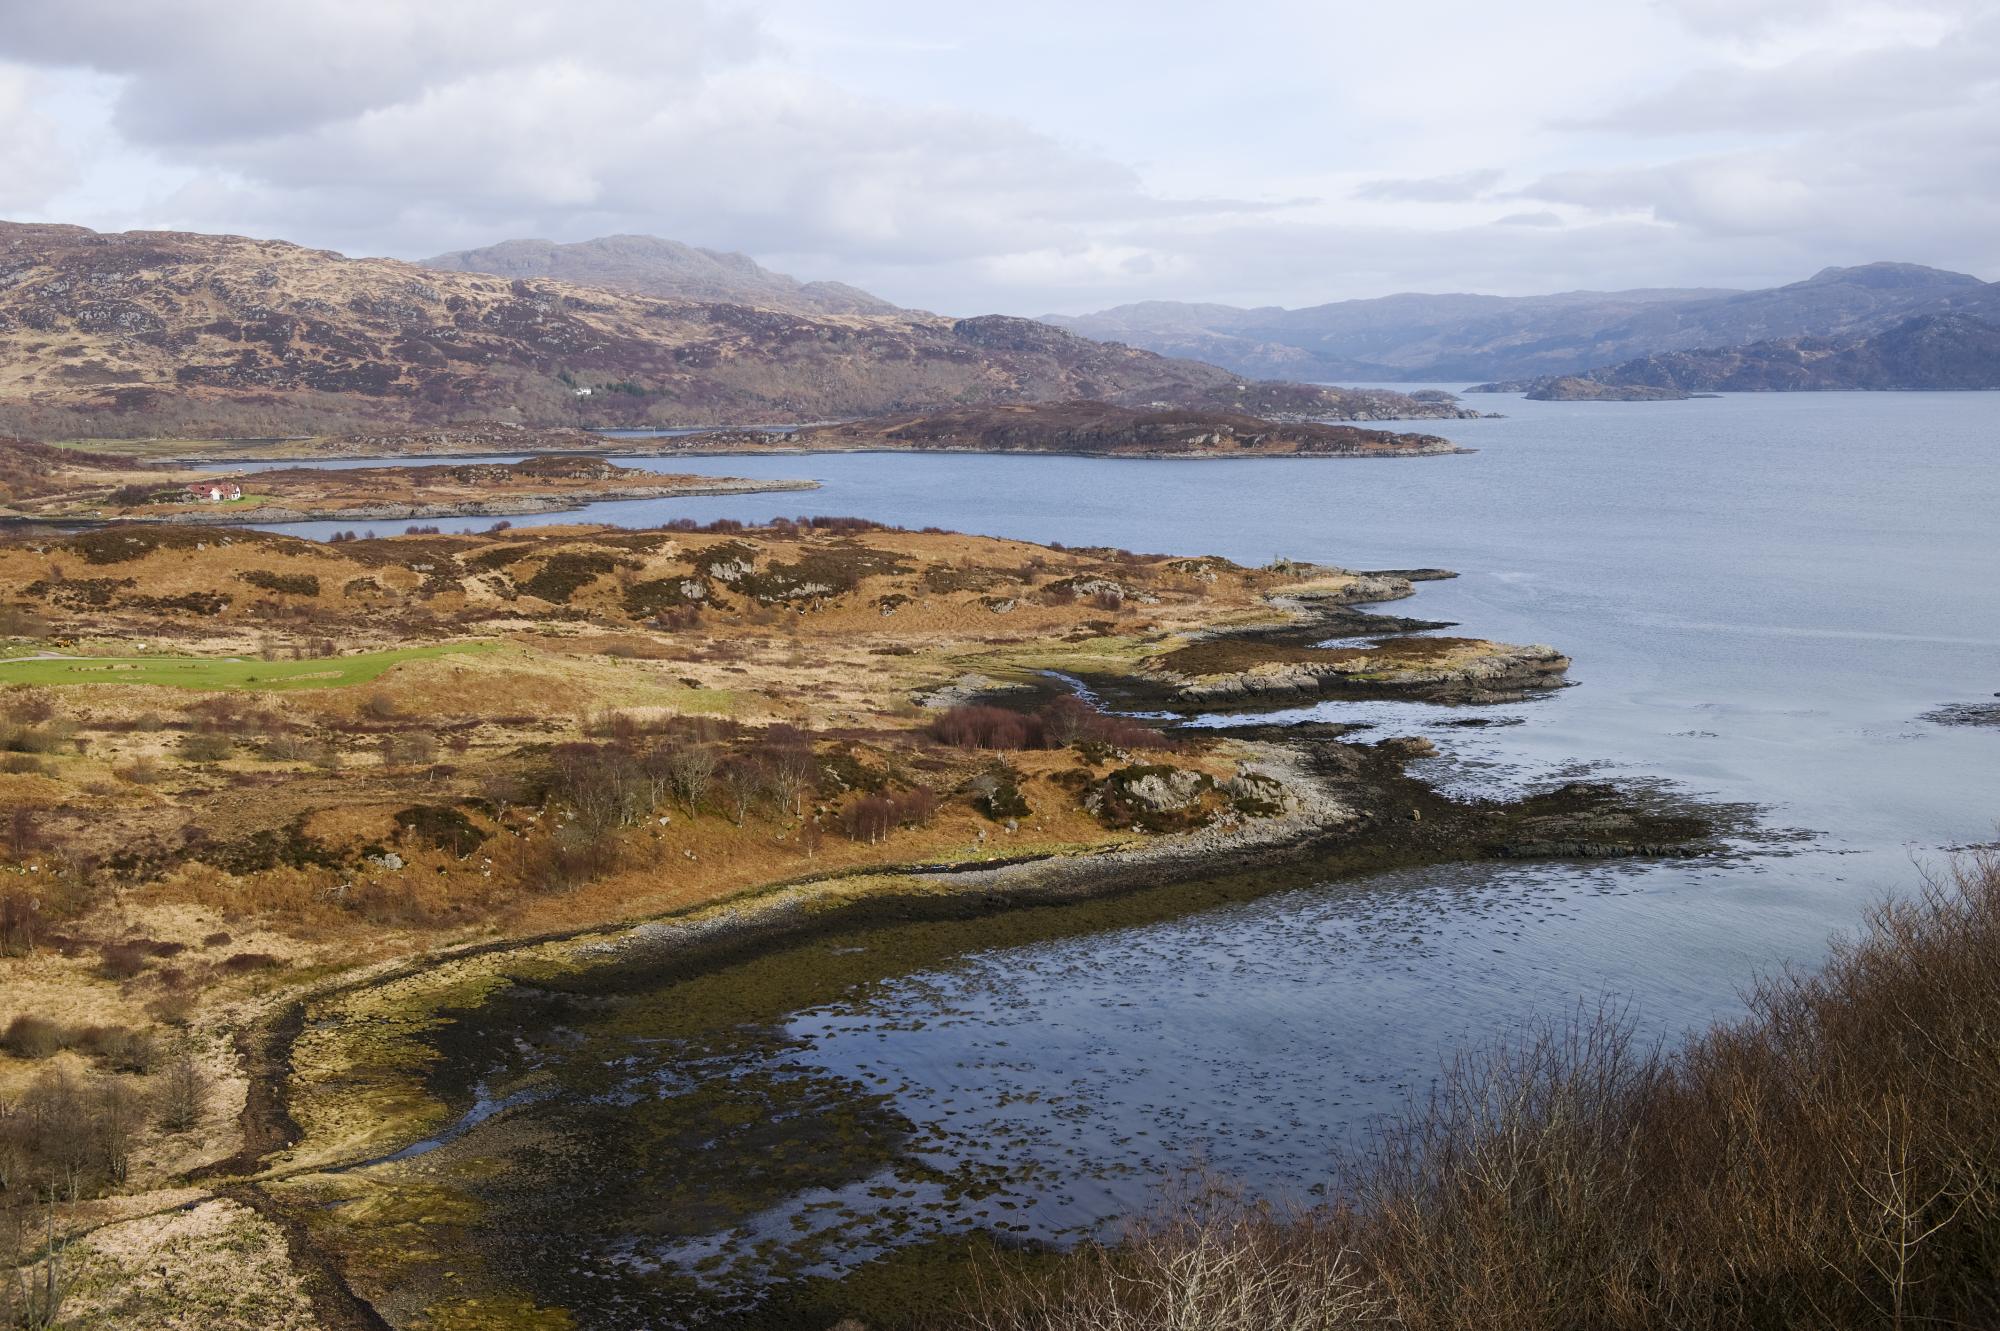 The Loch Sunart coastline near Glenmore, Ardnamurchan, West Highland Area. ©Lorne Gill/SNH. For information on reproduction rights, contact the Scottish Natural Heritage image library on Tel: 01738 444177 or www.nature.scot